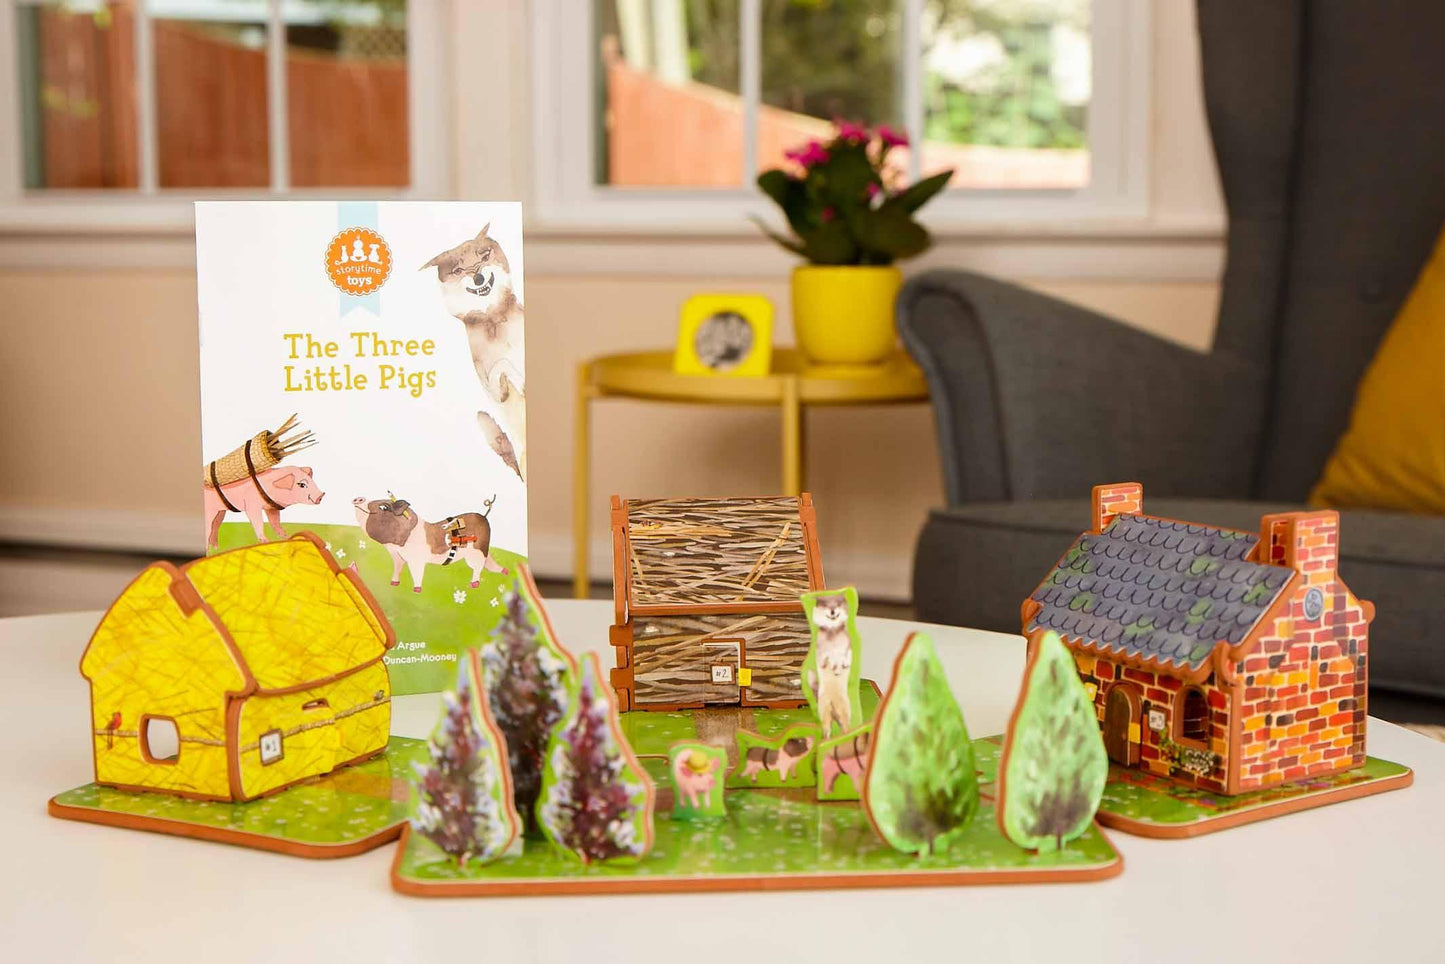 The Three Little Pigs Book and Play Set - Sorelle Gifts